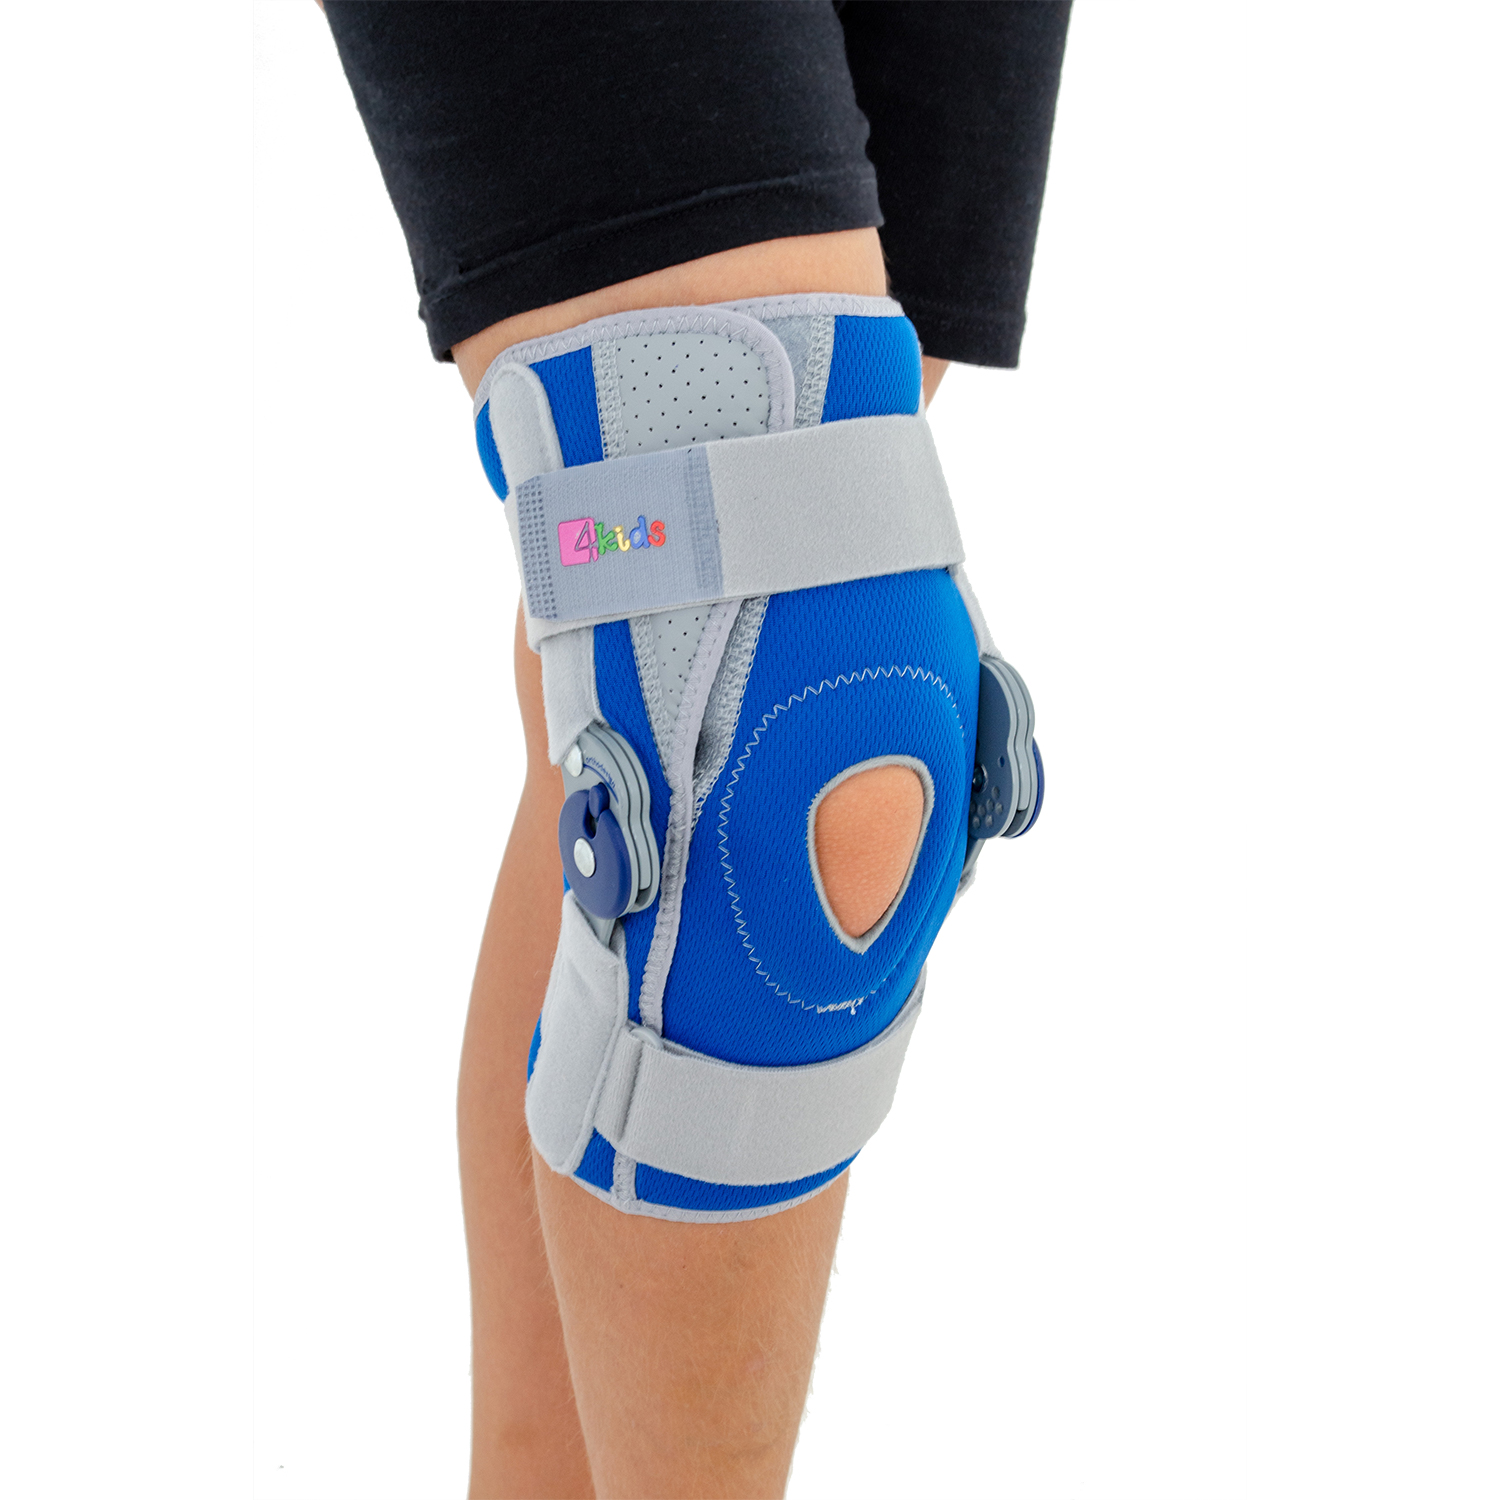 Choosing the best knee brace for patellofemoral pain syndrome